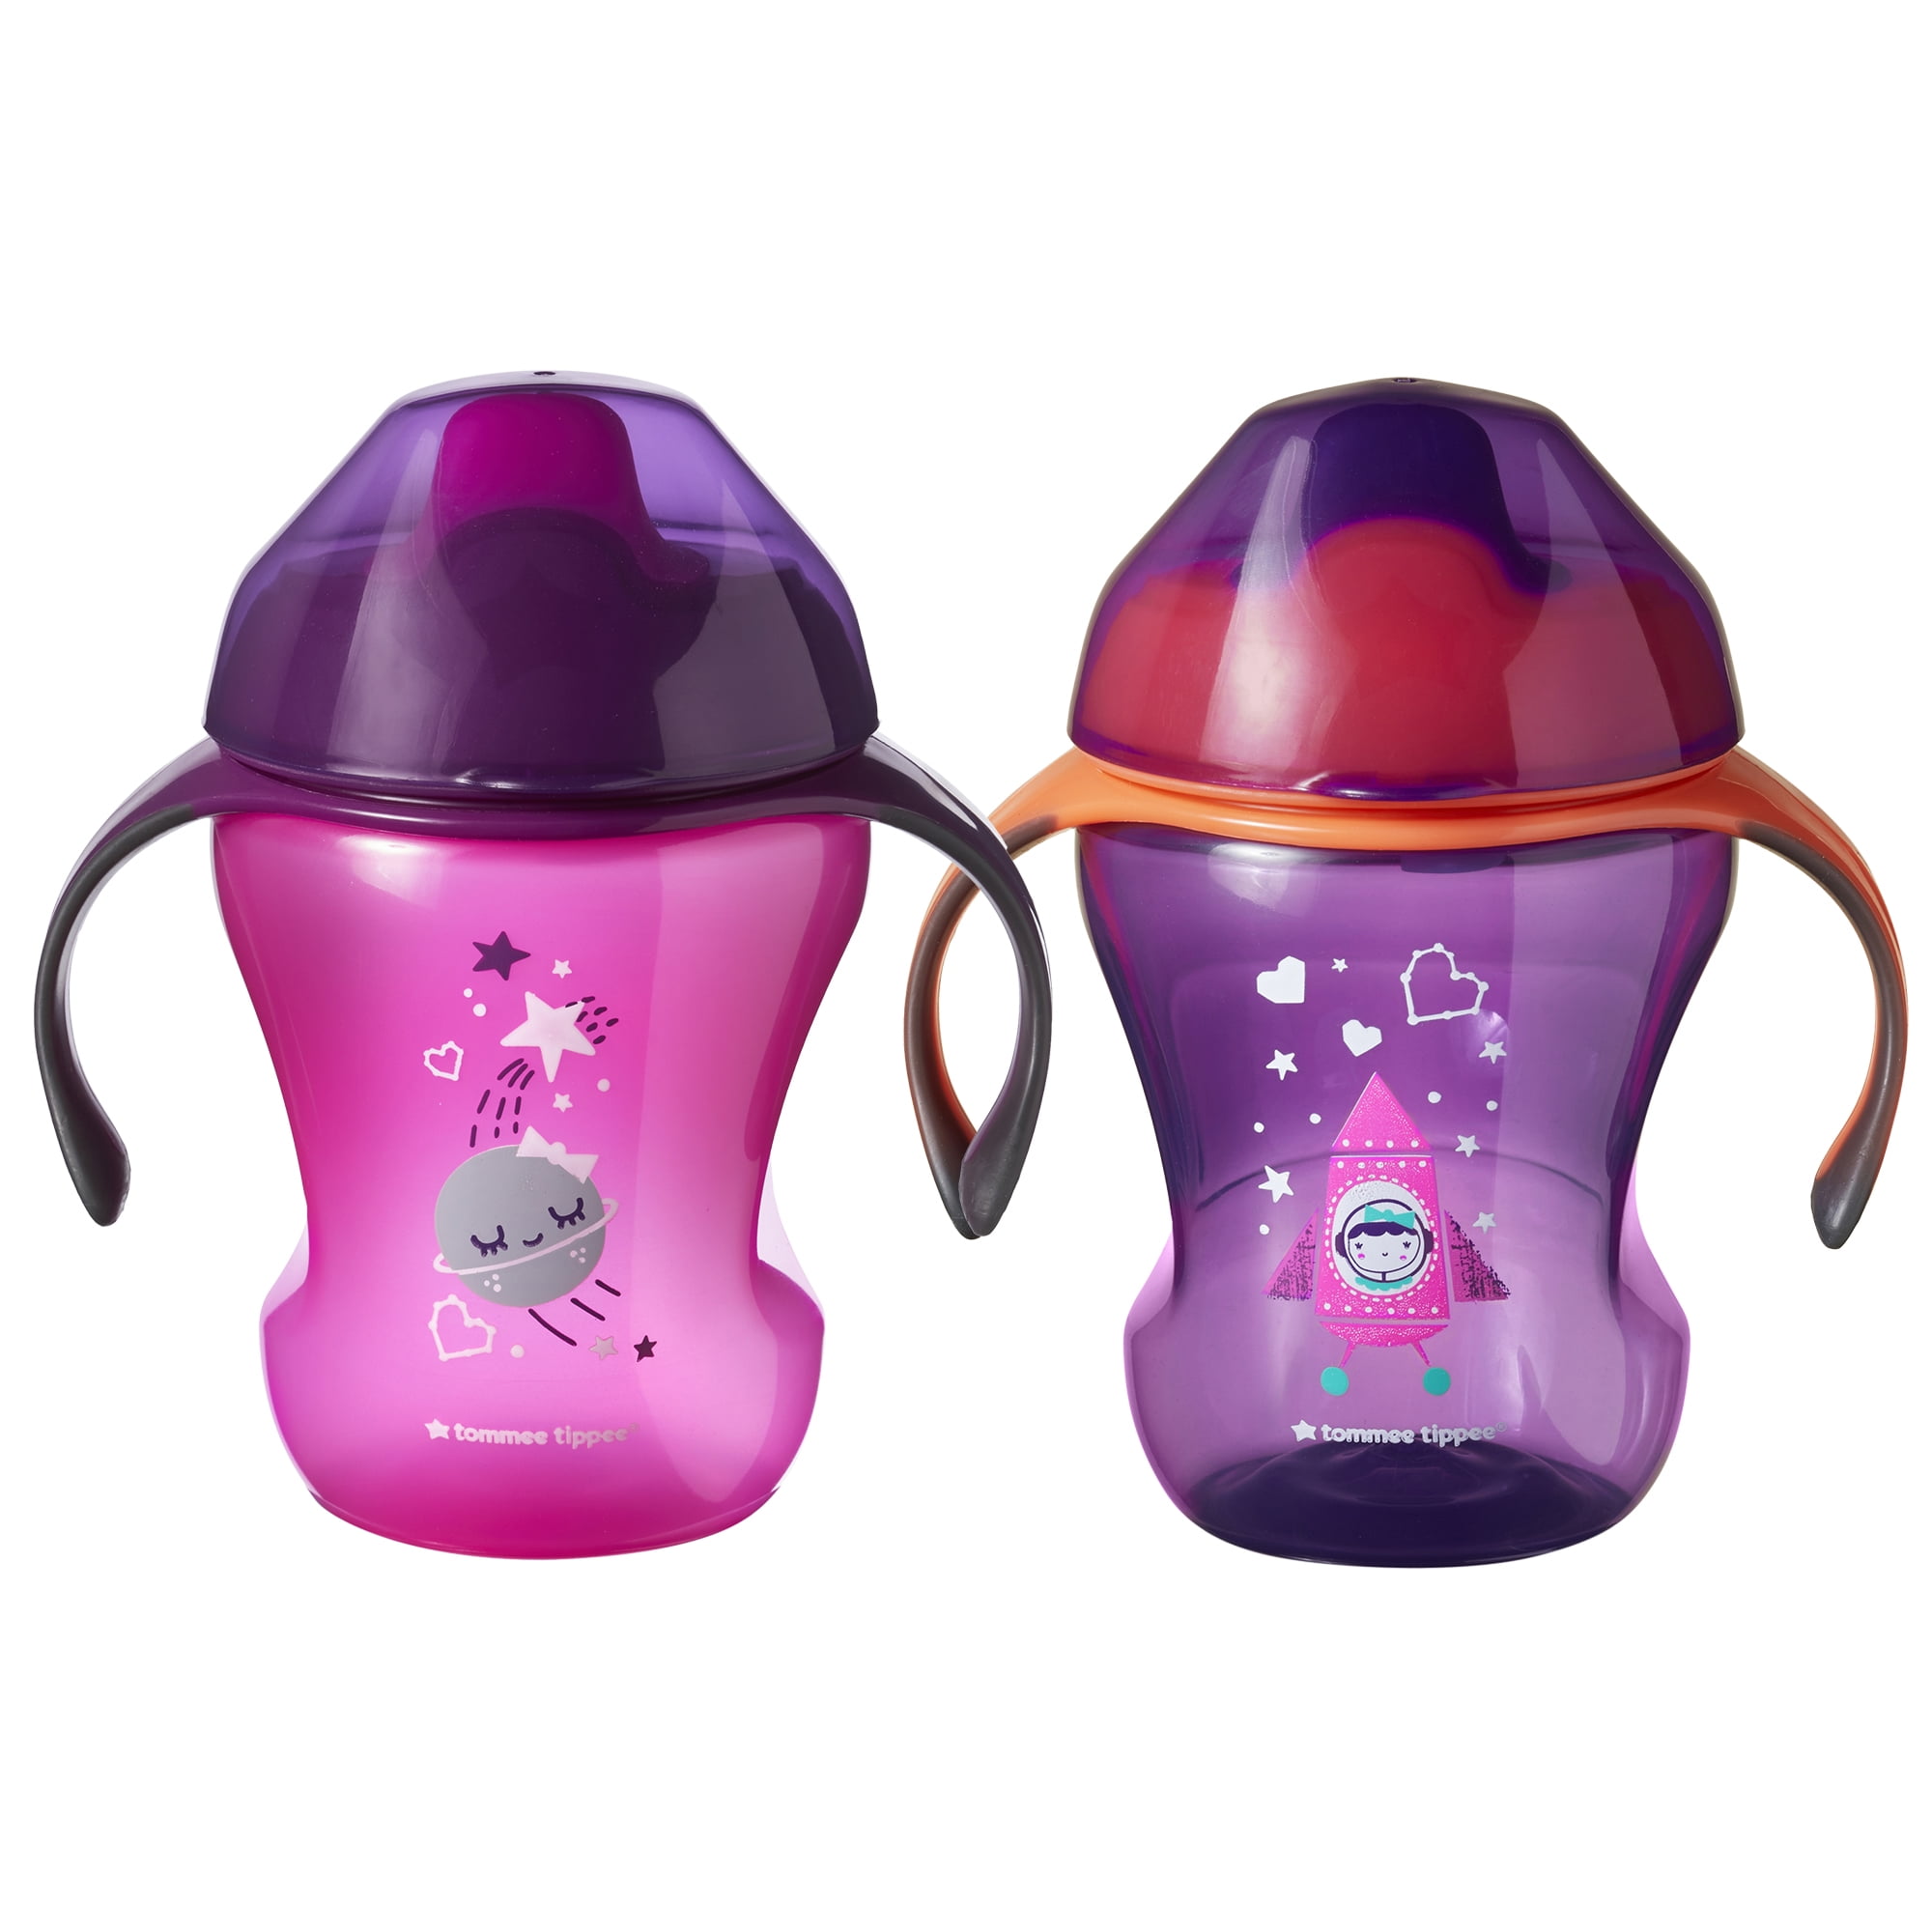 2 tétines 0-6mois tommee tippee neuve - Tommee Tippee